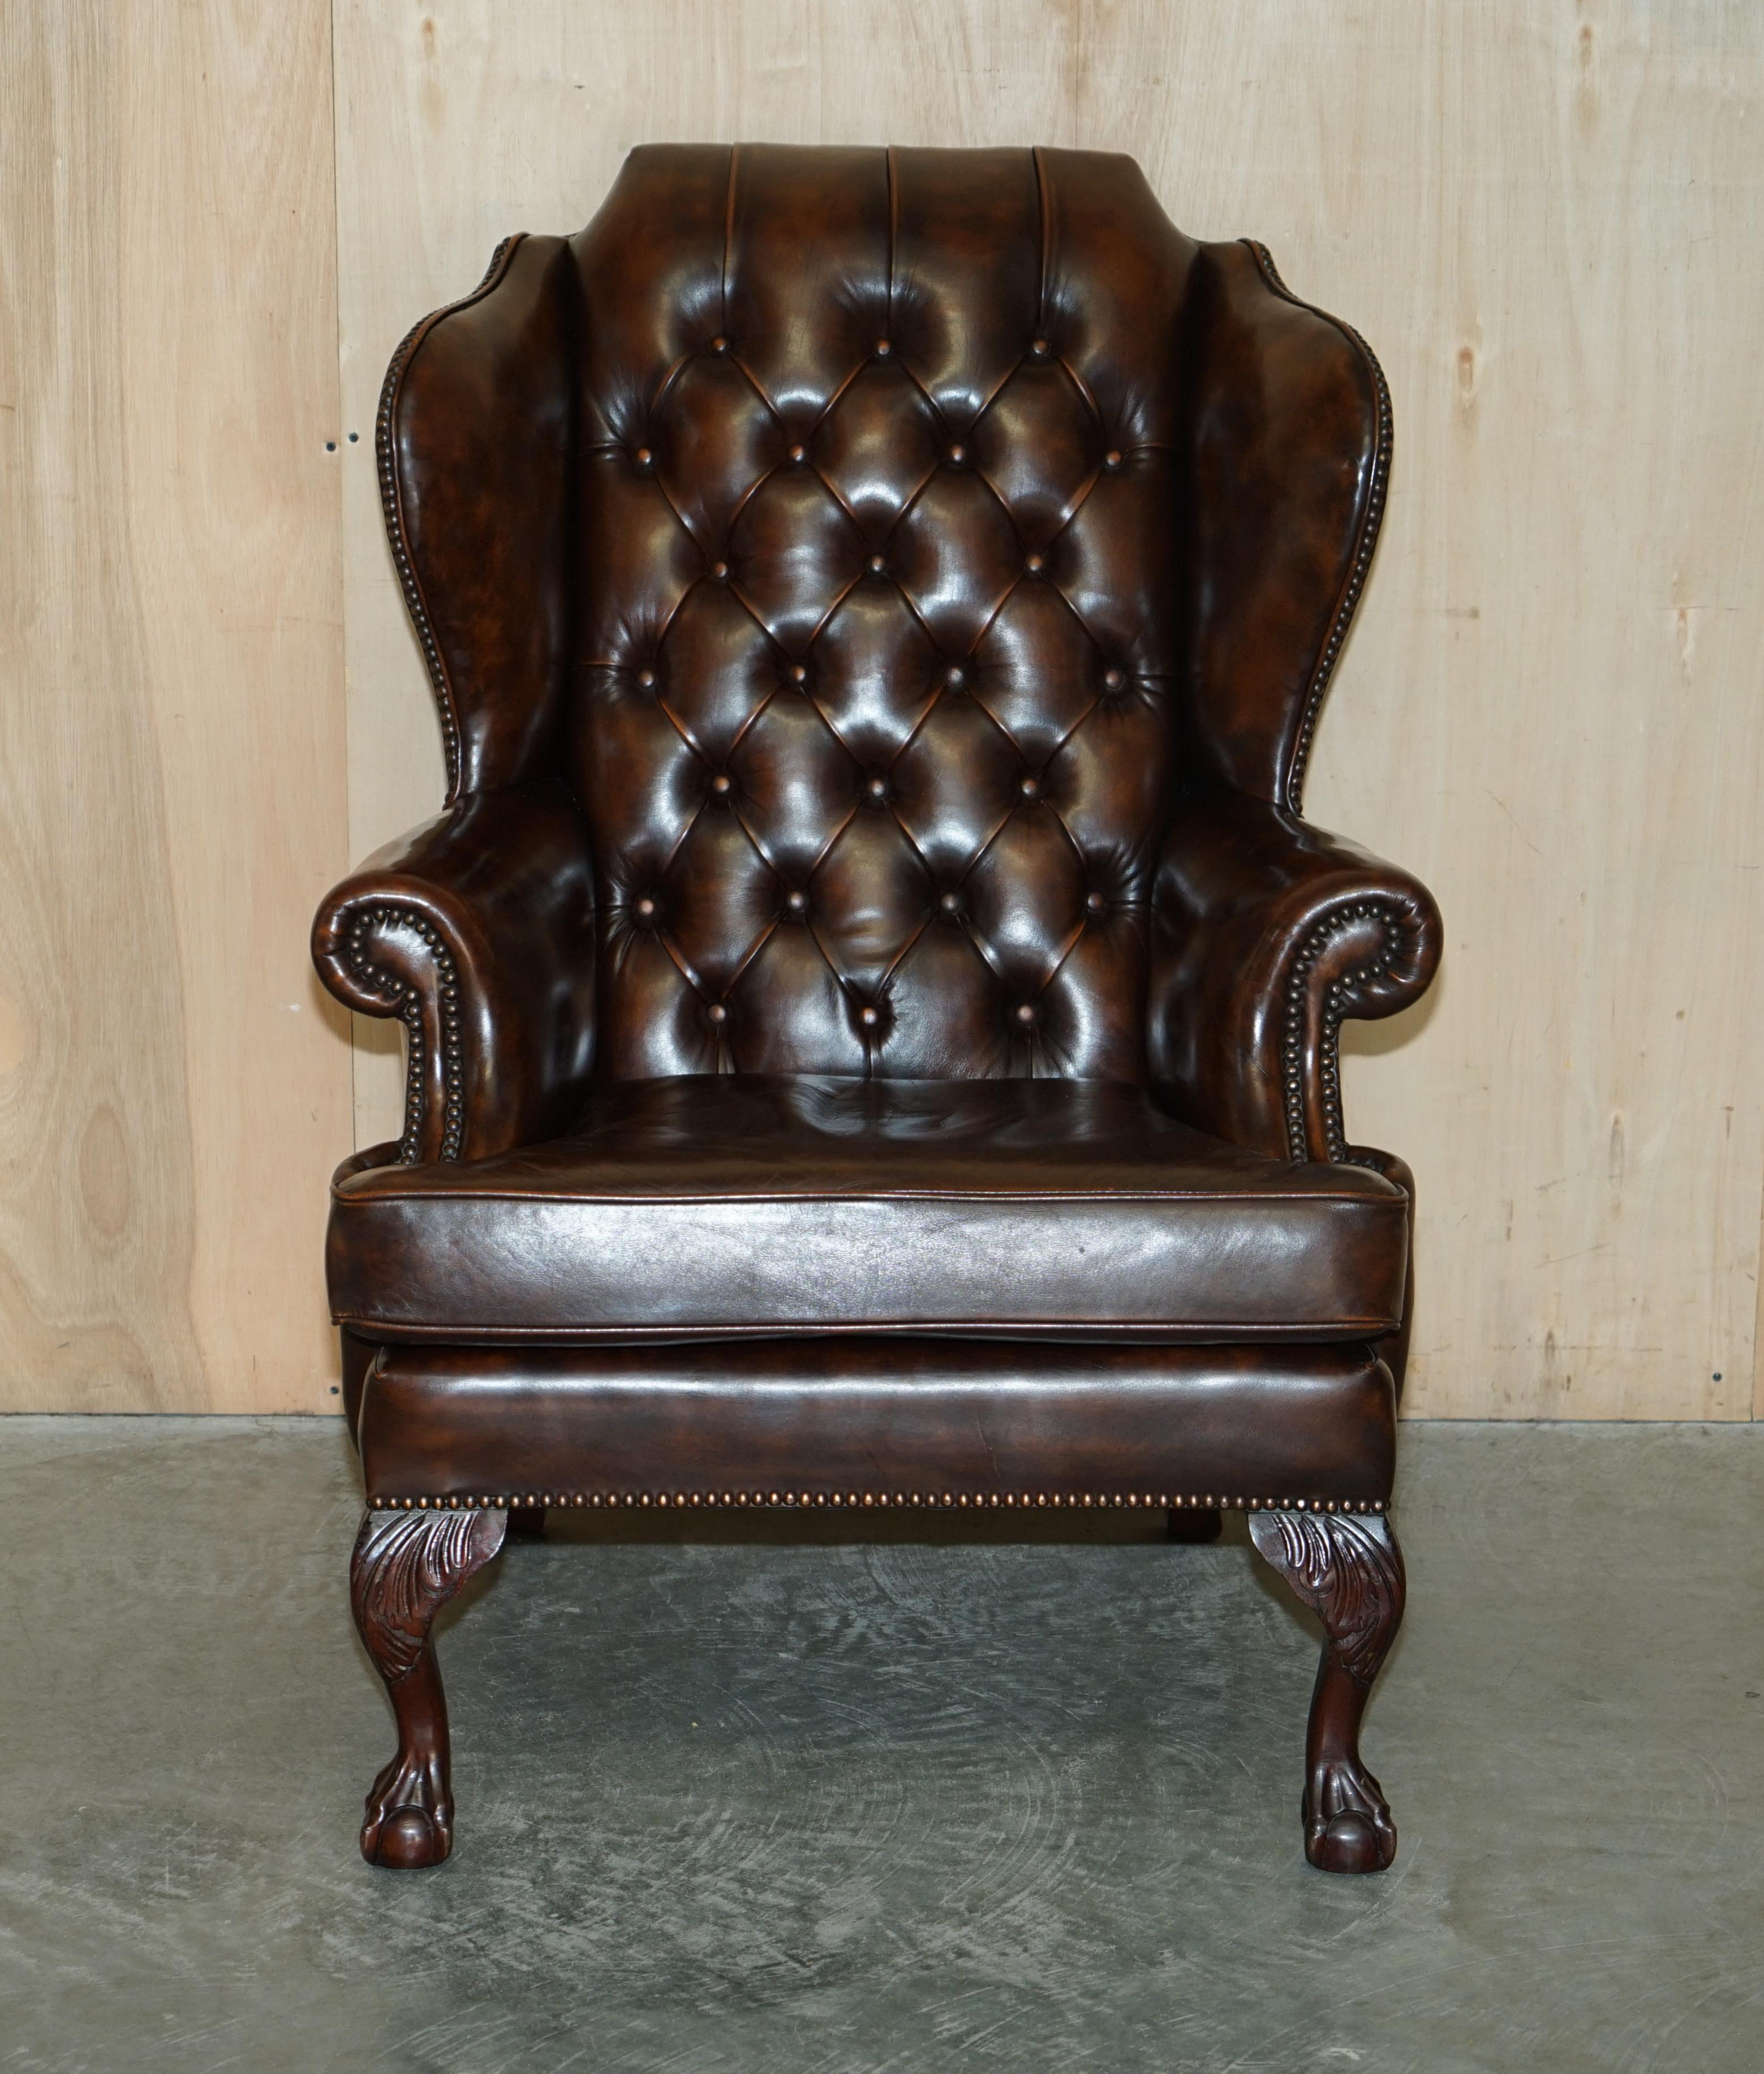 We are delighted to offer for sale this stunning pair of Chesterfield Chestnut Brown leather wingback armchairs with hand-carved claw and ball feet

A good looking and well-made pair, nice to see with the hand carved claw and ball feet, they have